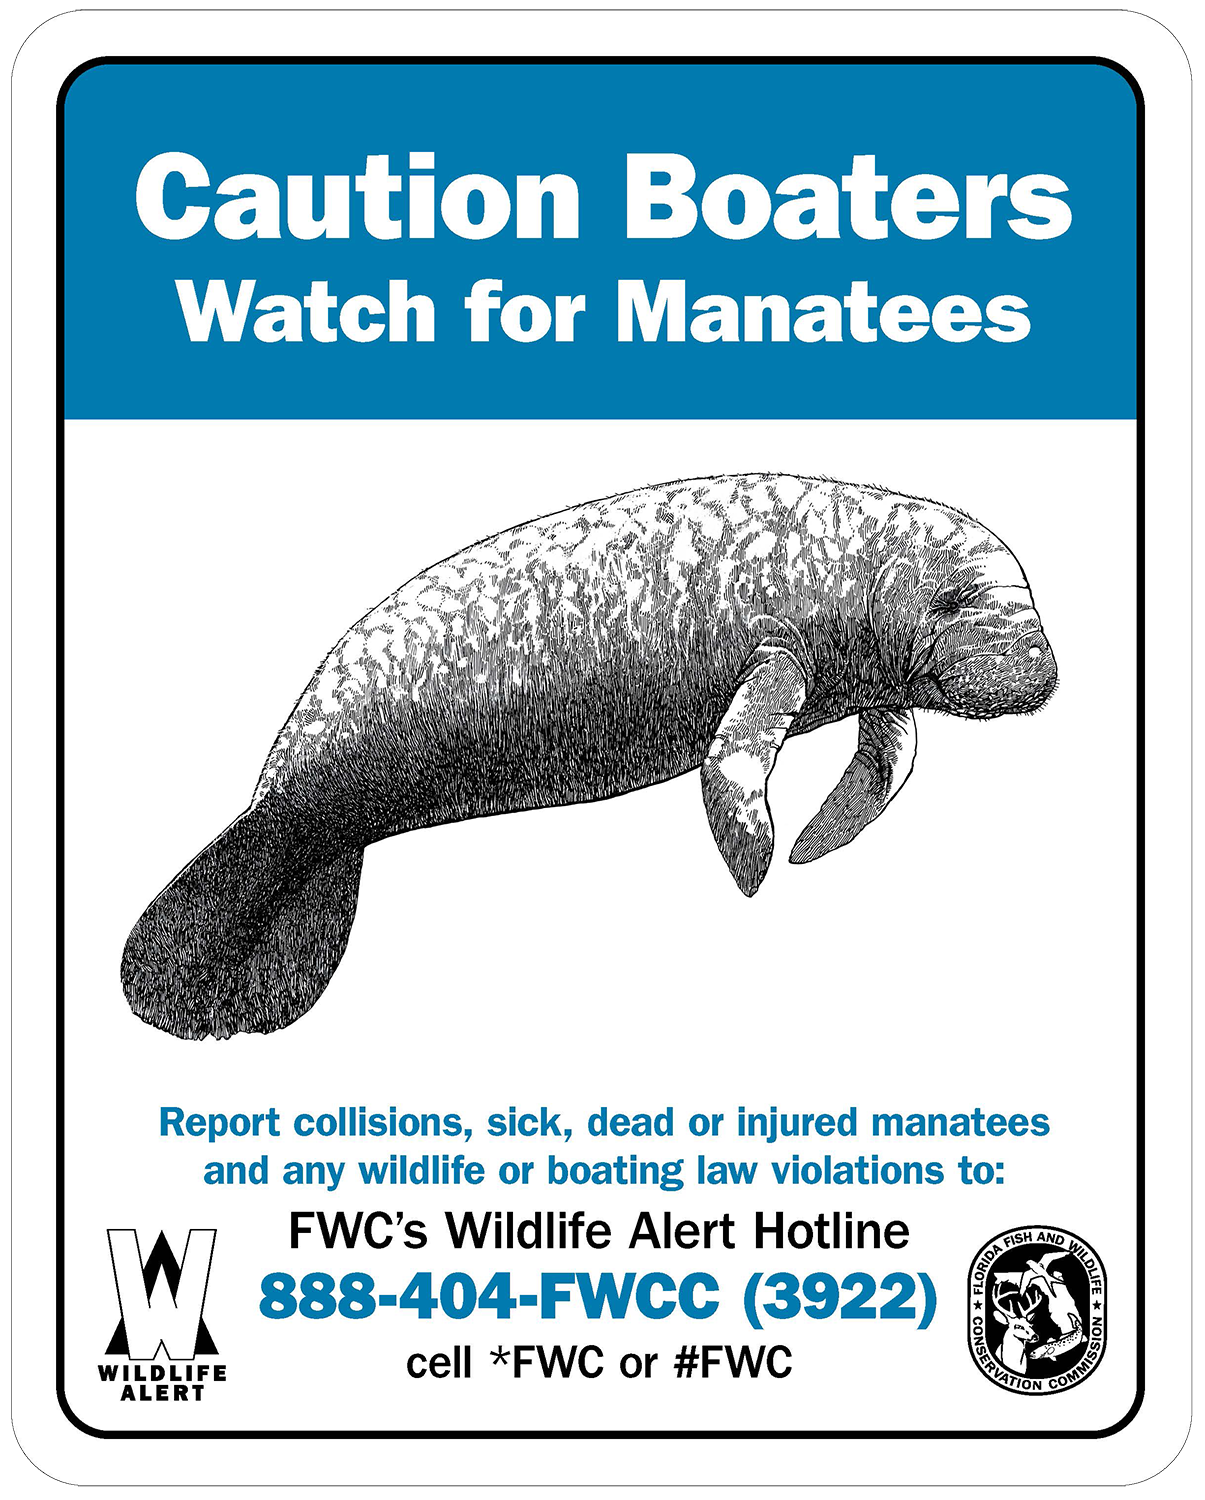 Caution Boaters